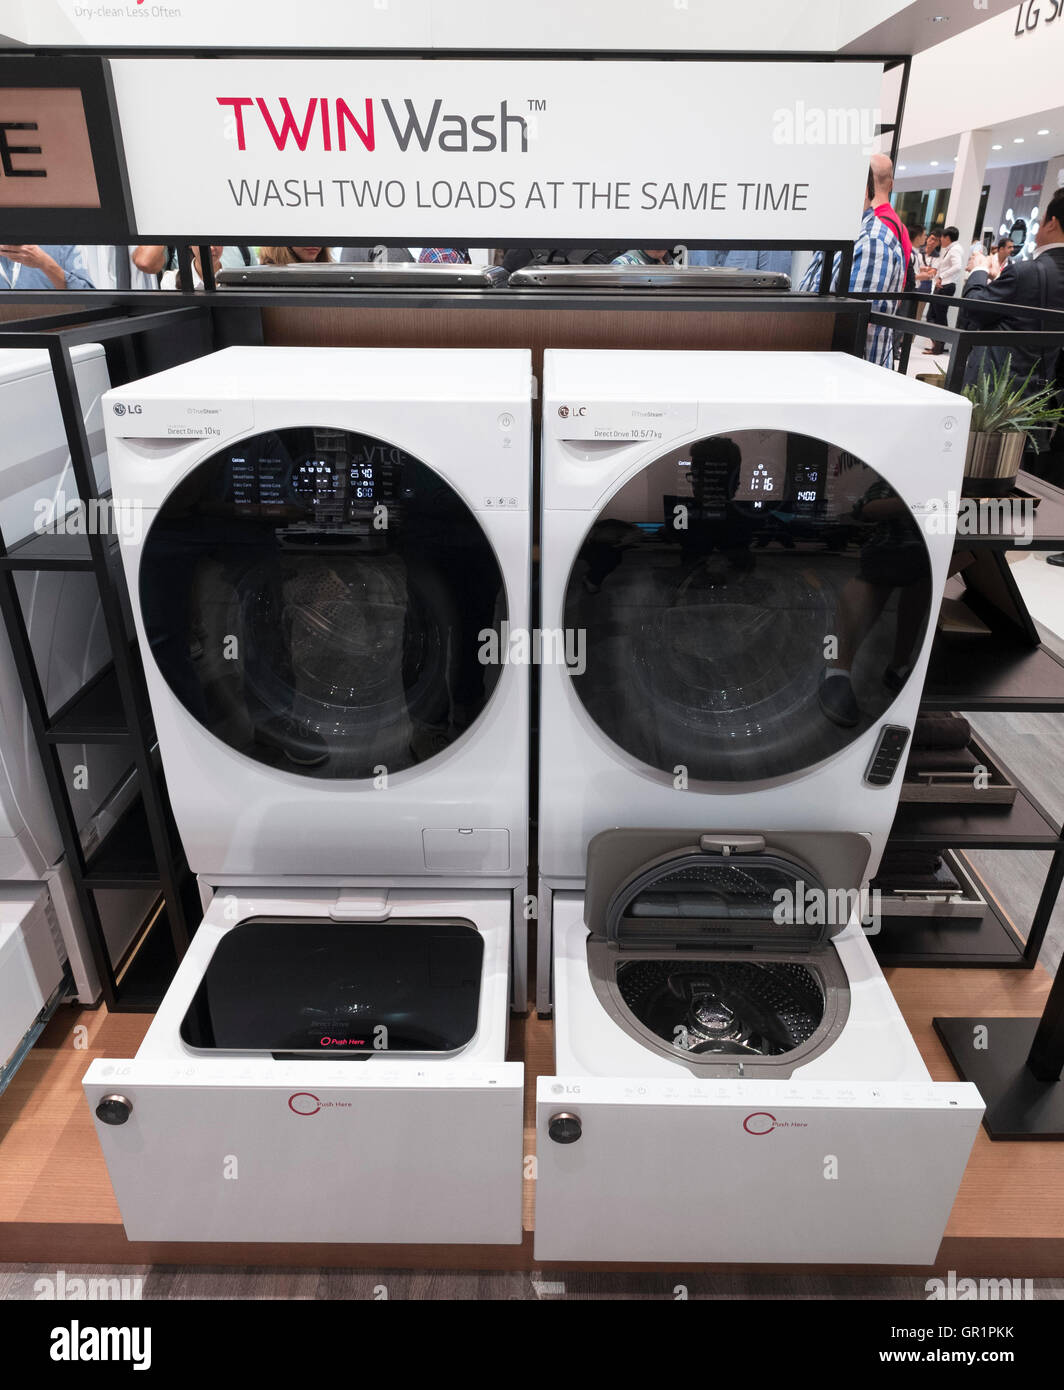 LG Twinwash washing machine with twin drums for simultaneous washing and  drying at 2016 IFA (Internationale Funkausstellung Ber Stock Photo - Alamy